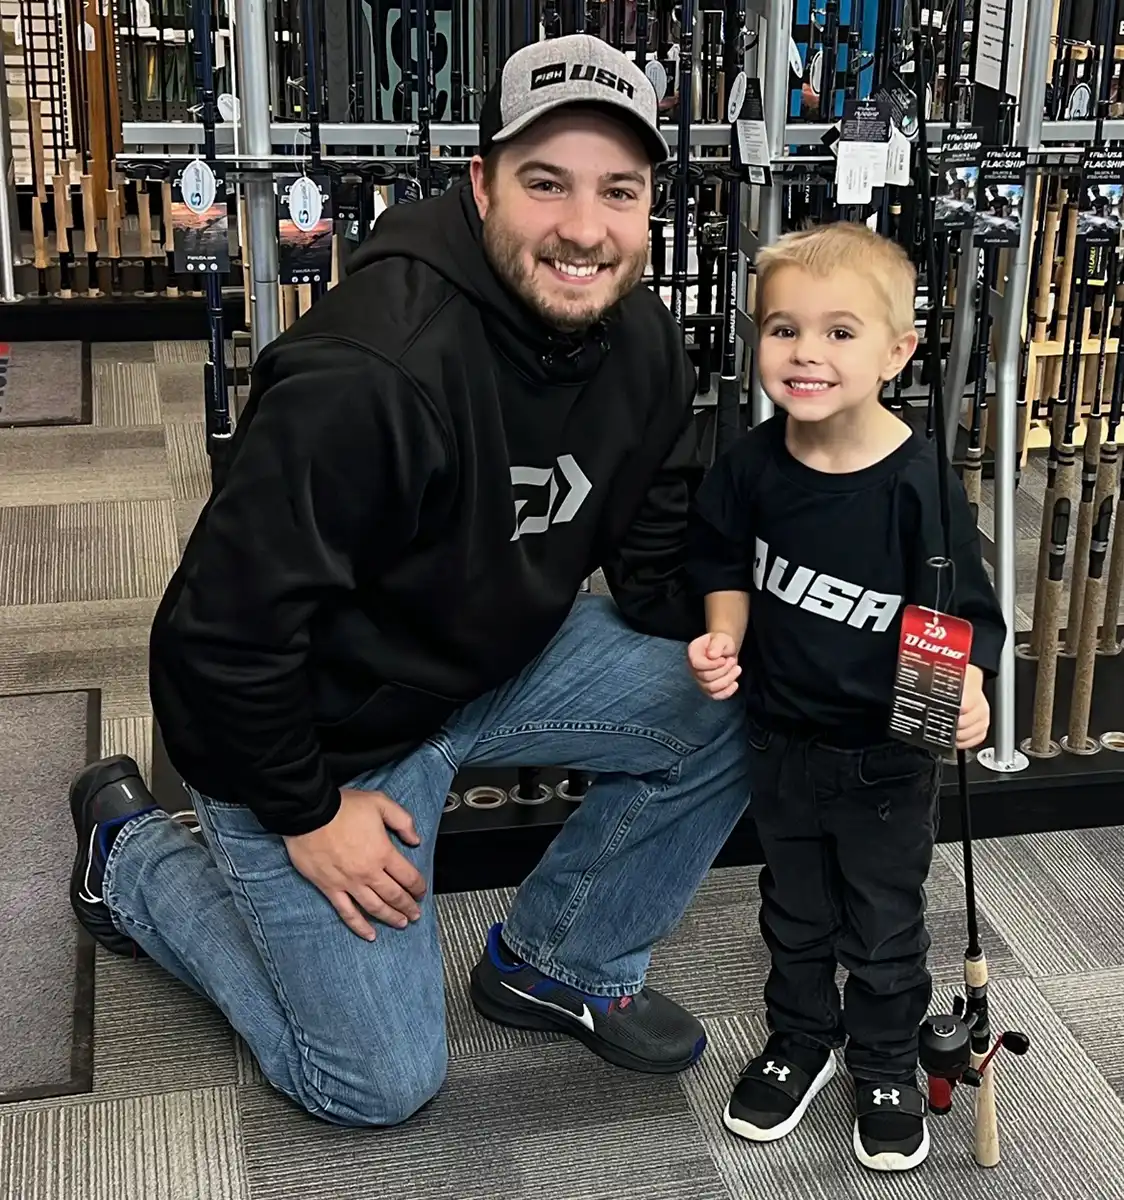 FishUSA Pro Shop Offering First 100 Kids Free Rod and Reel on Black Friday  - Wired2Fish